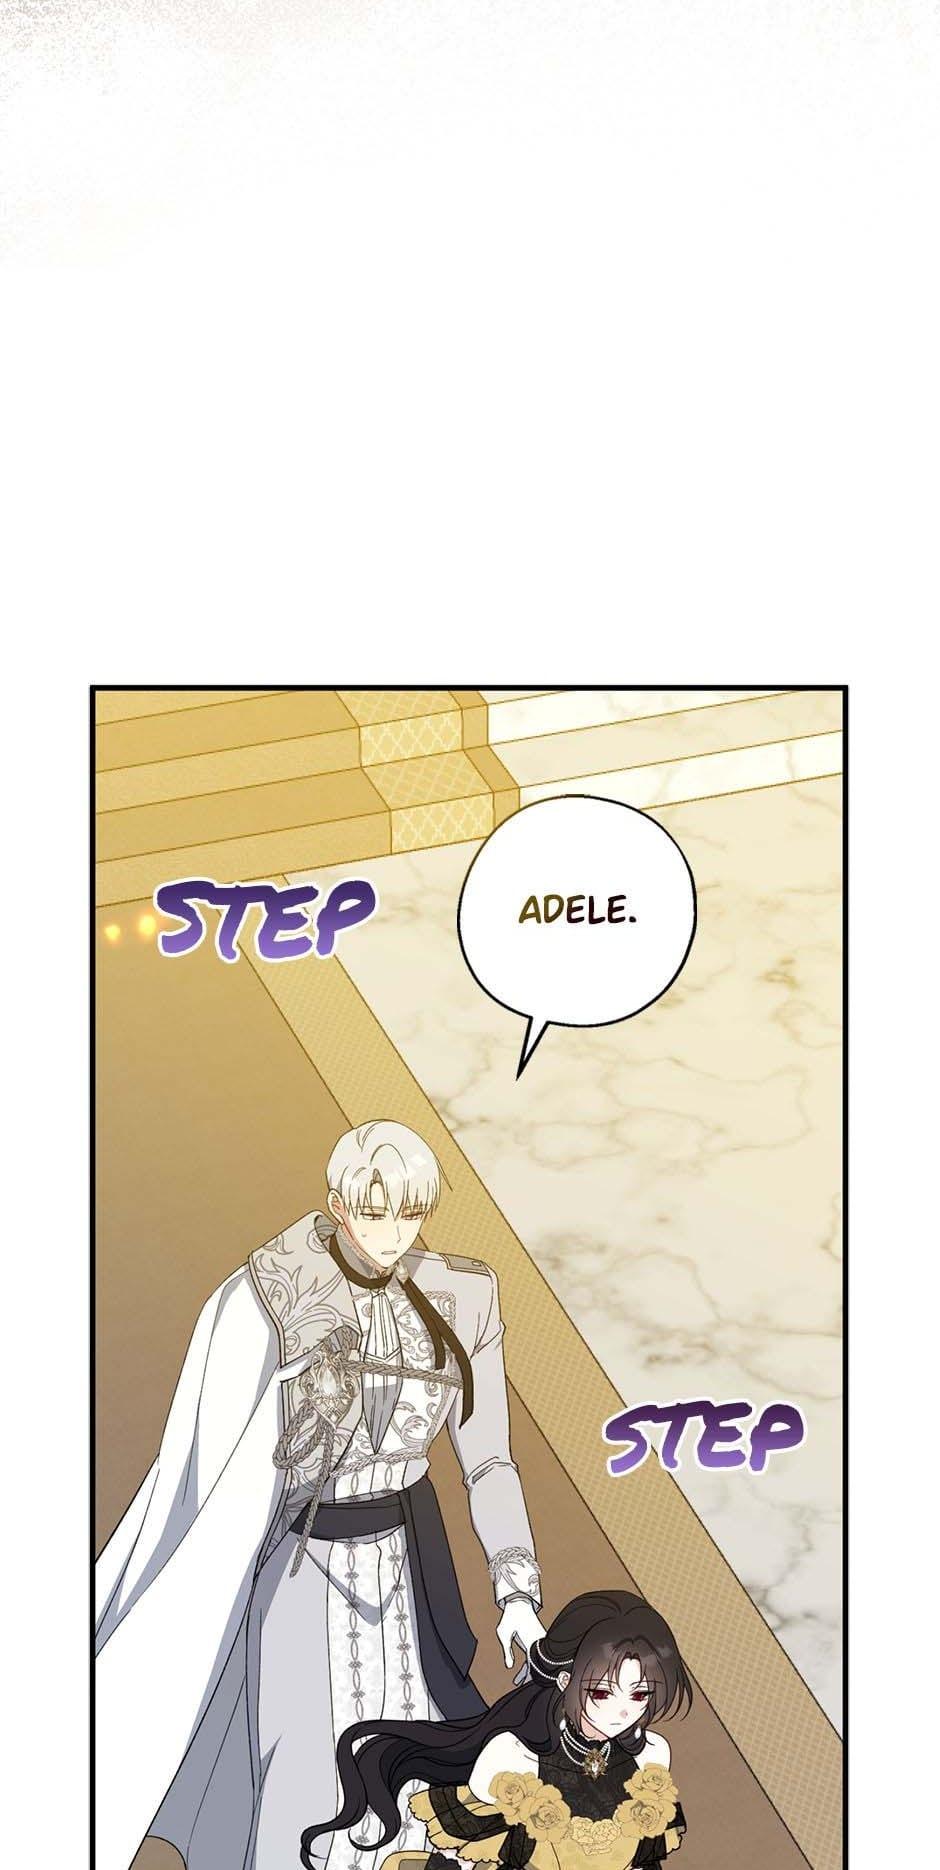 Say Ah, the Golden Spoon Is Entering (3 Dumb Musketeers) - chapter 88 - #6